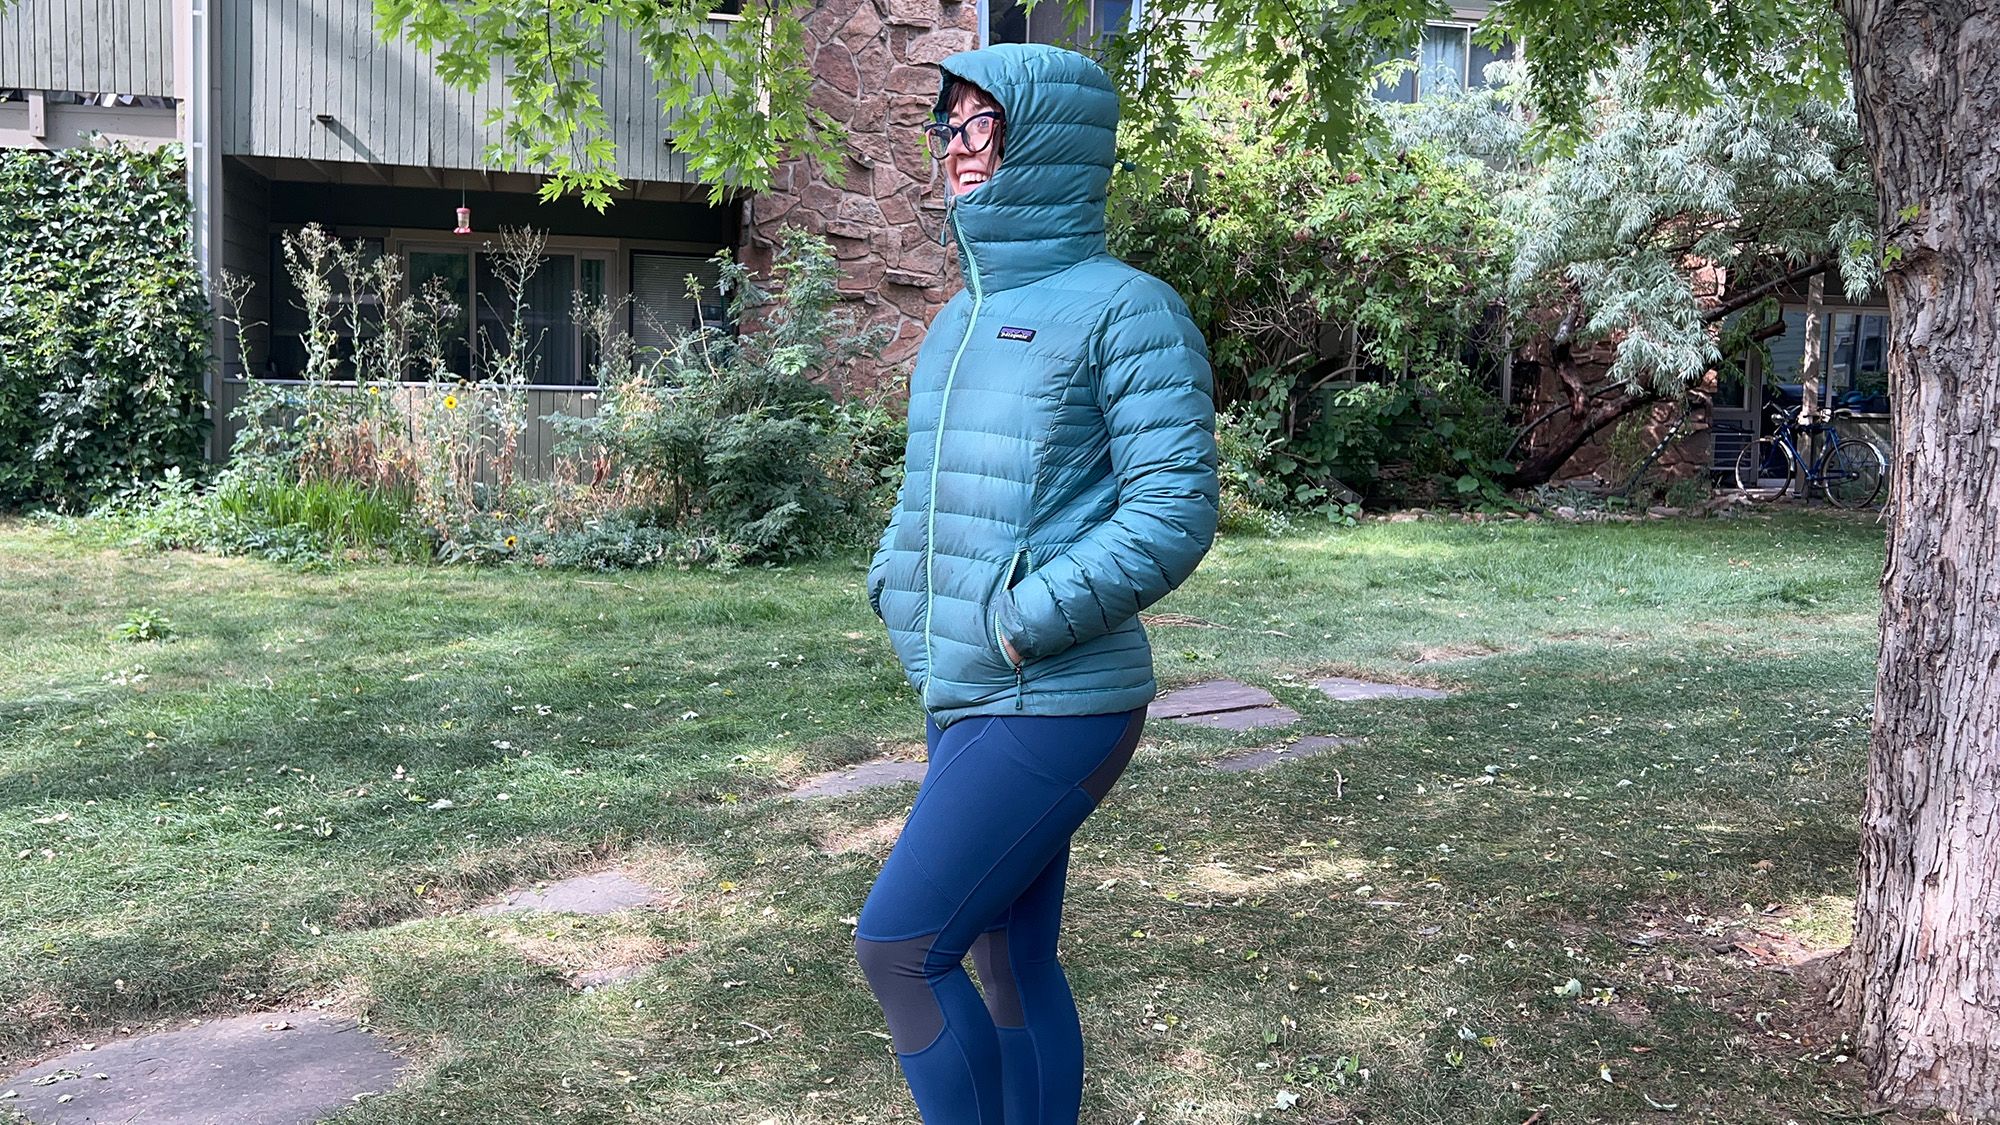 Women's Patagonia Down With It Jacket